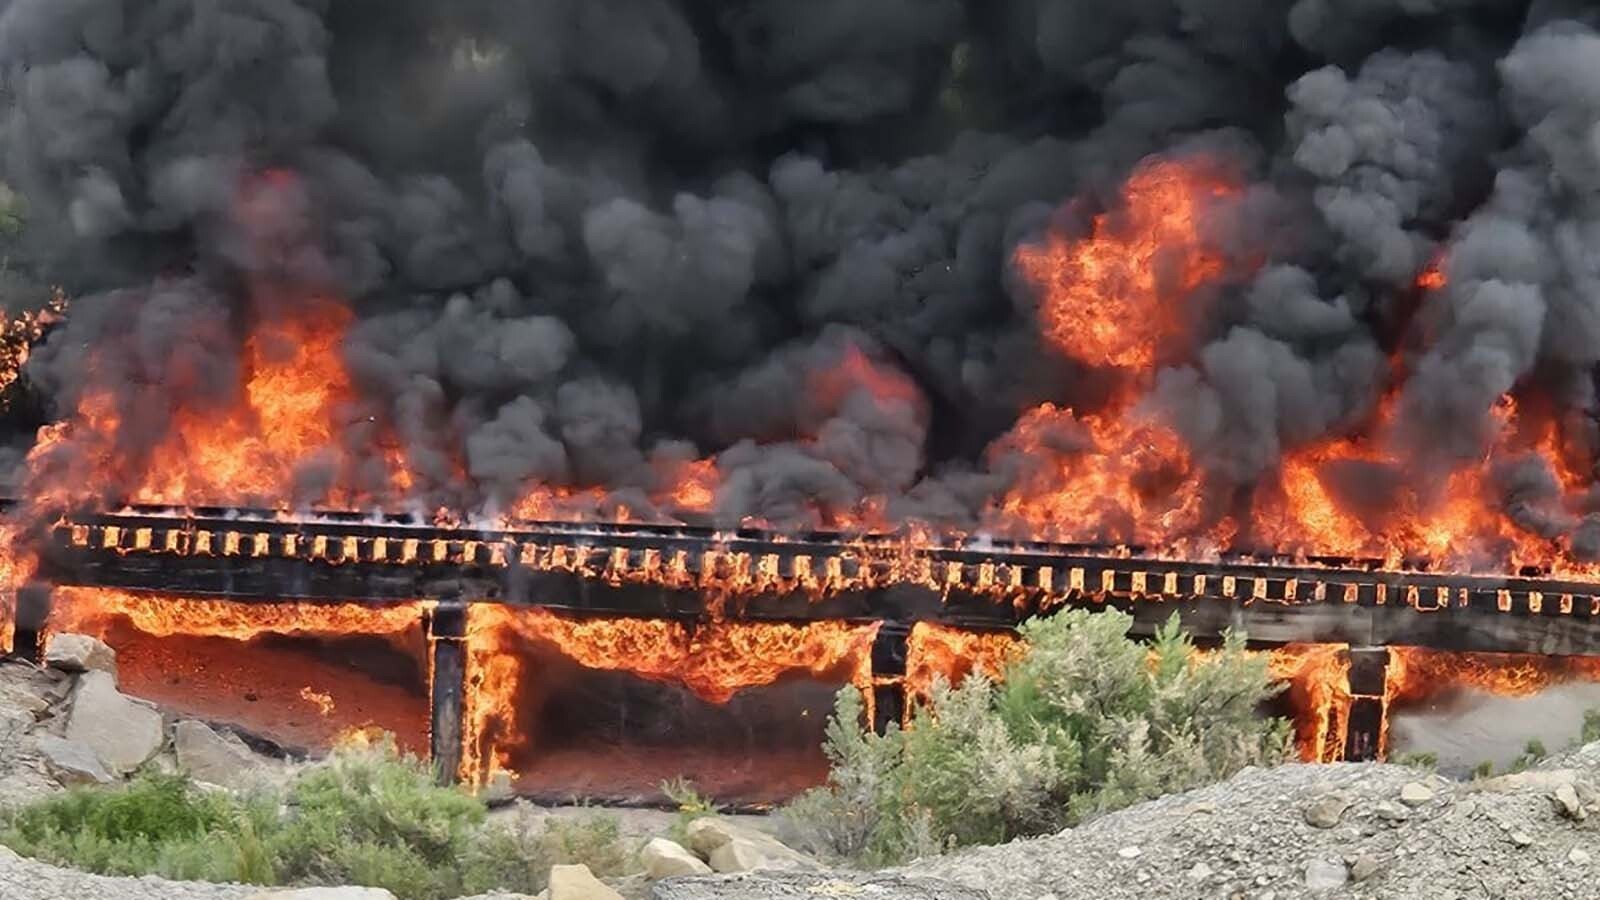 Three juveniles playing with fire are suspected of accidentally setting a timber-frame railroad bridge on the southside of Rock Springs ablaze Wednesday.